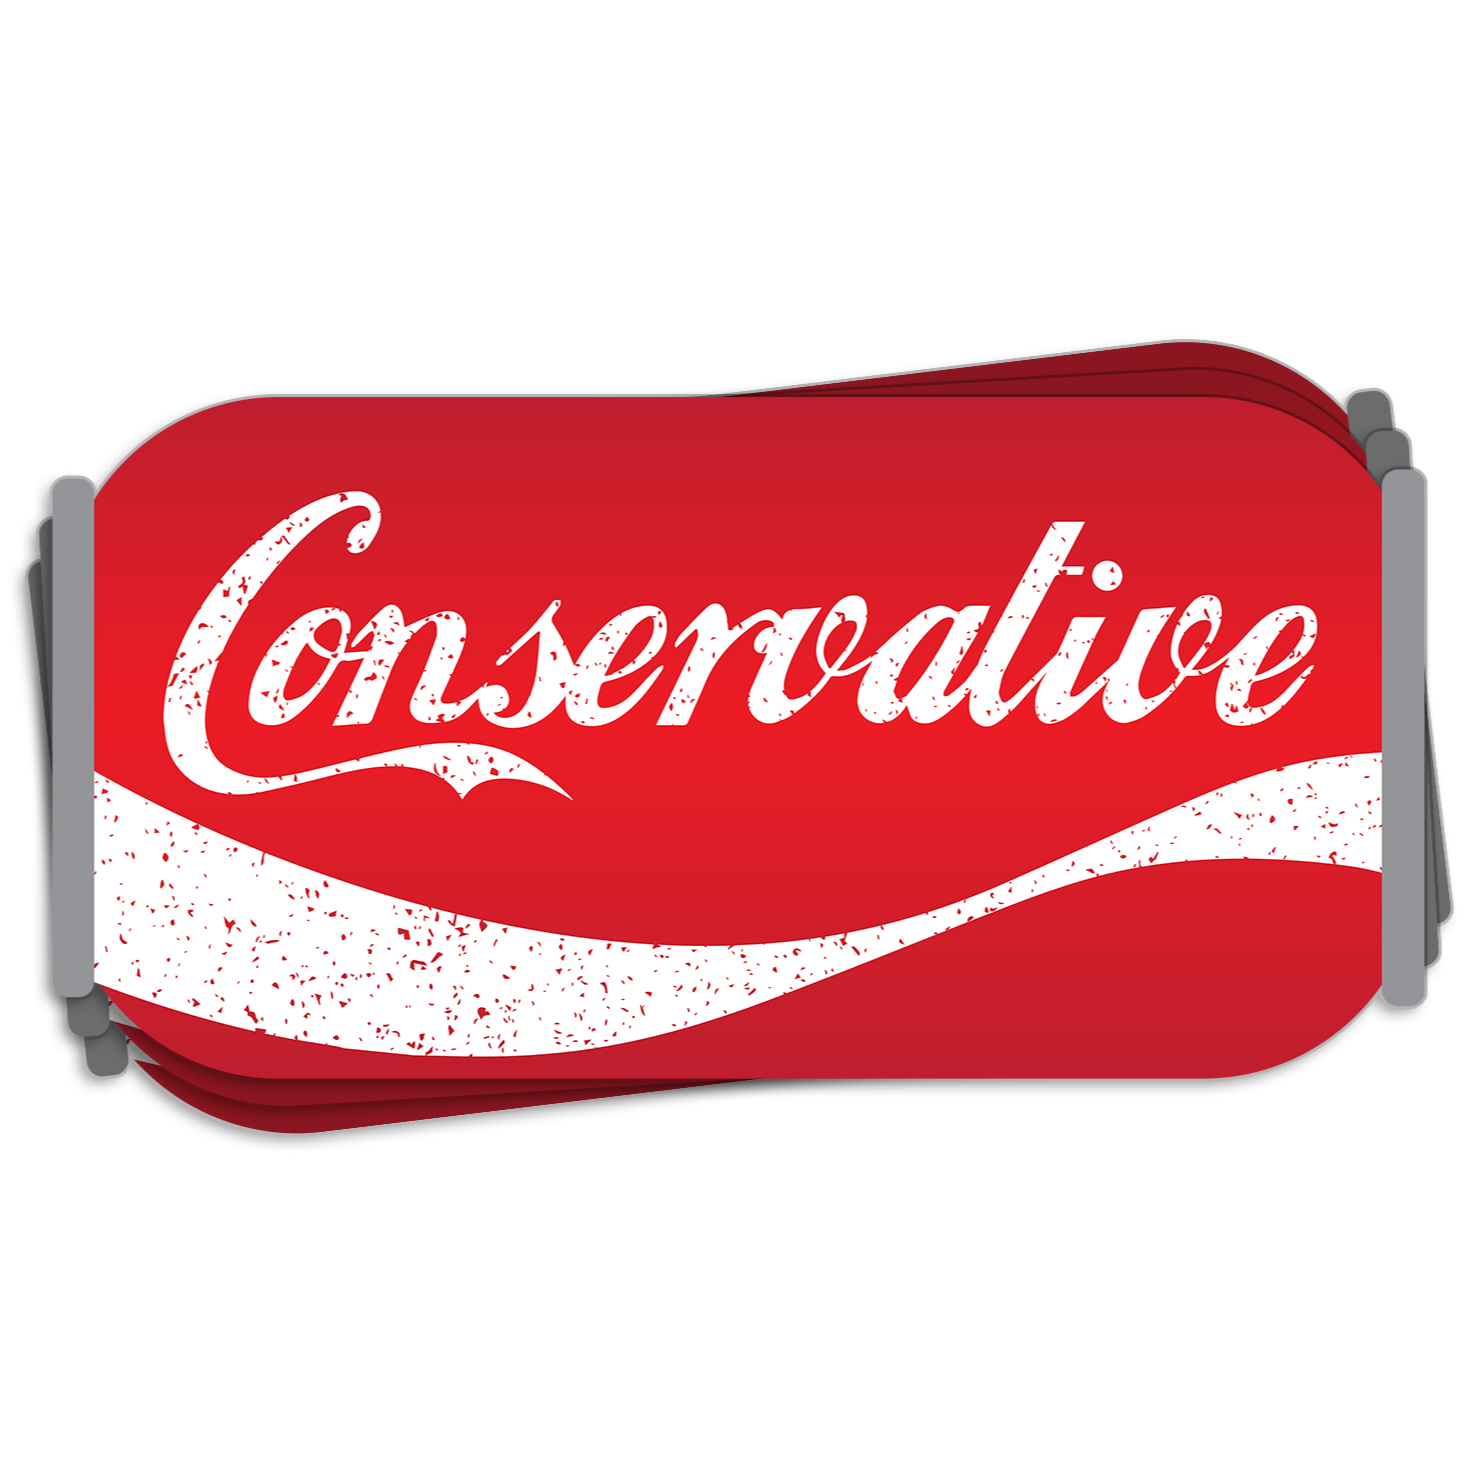 Conservative - Decal